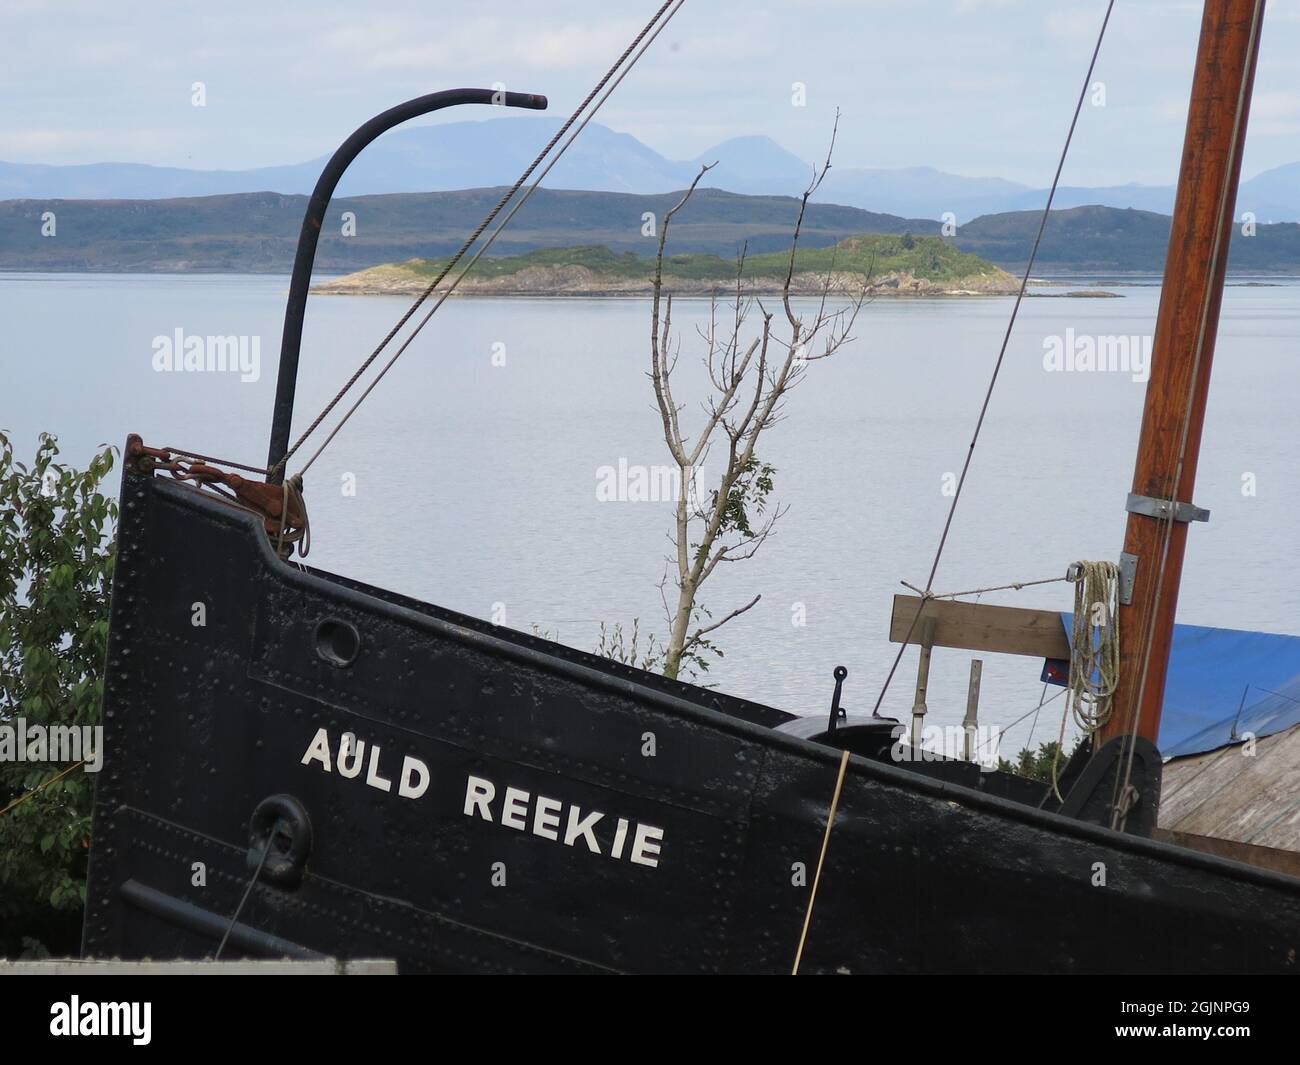 View of Auld Reekie, VIC 27, on the slipway at Crinan Boatyard where she's being restored to her former glory as a 66ft long Clyde steam puffer. Stock Photo